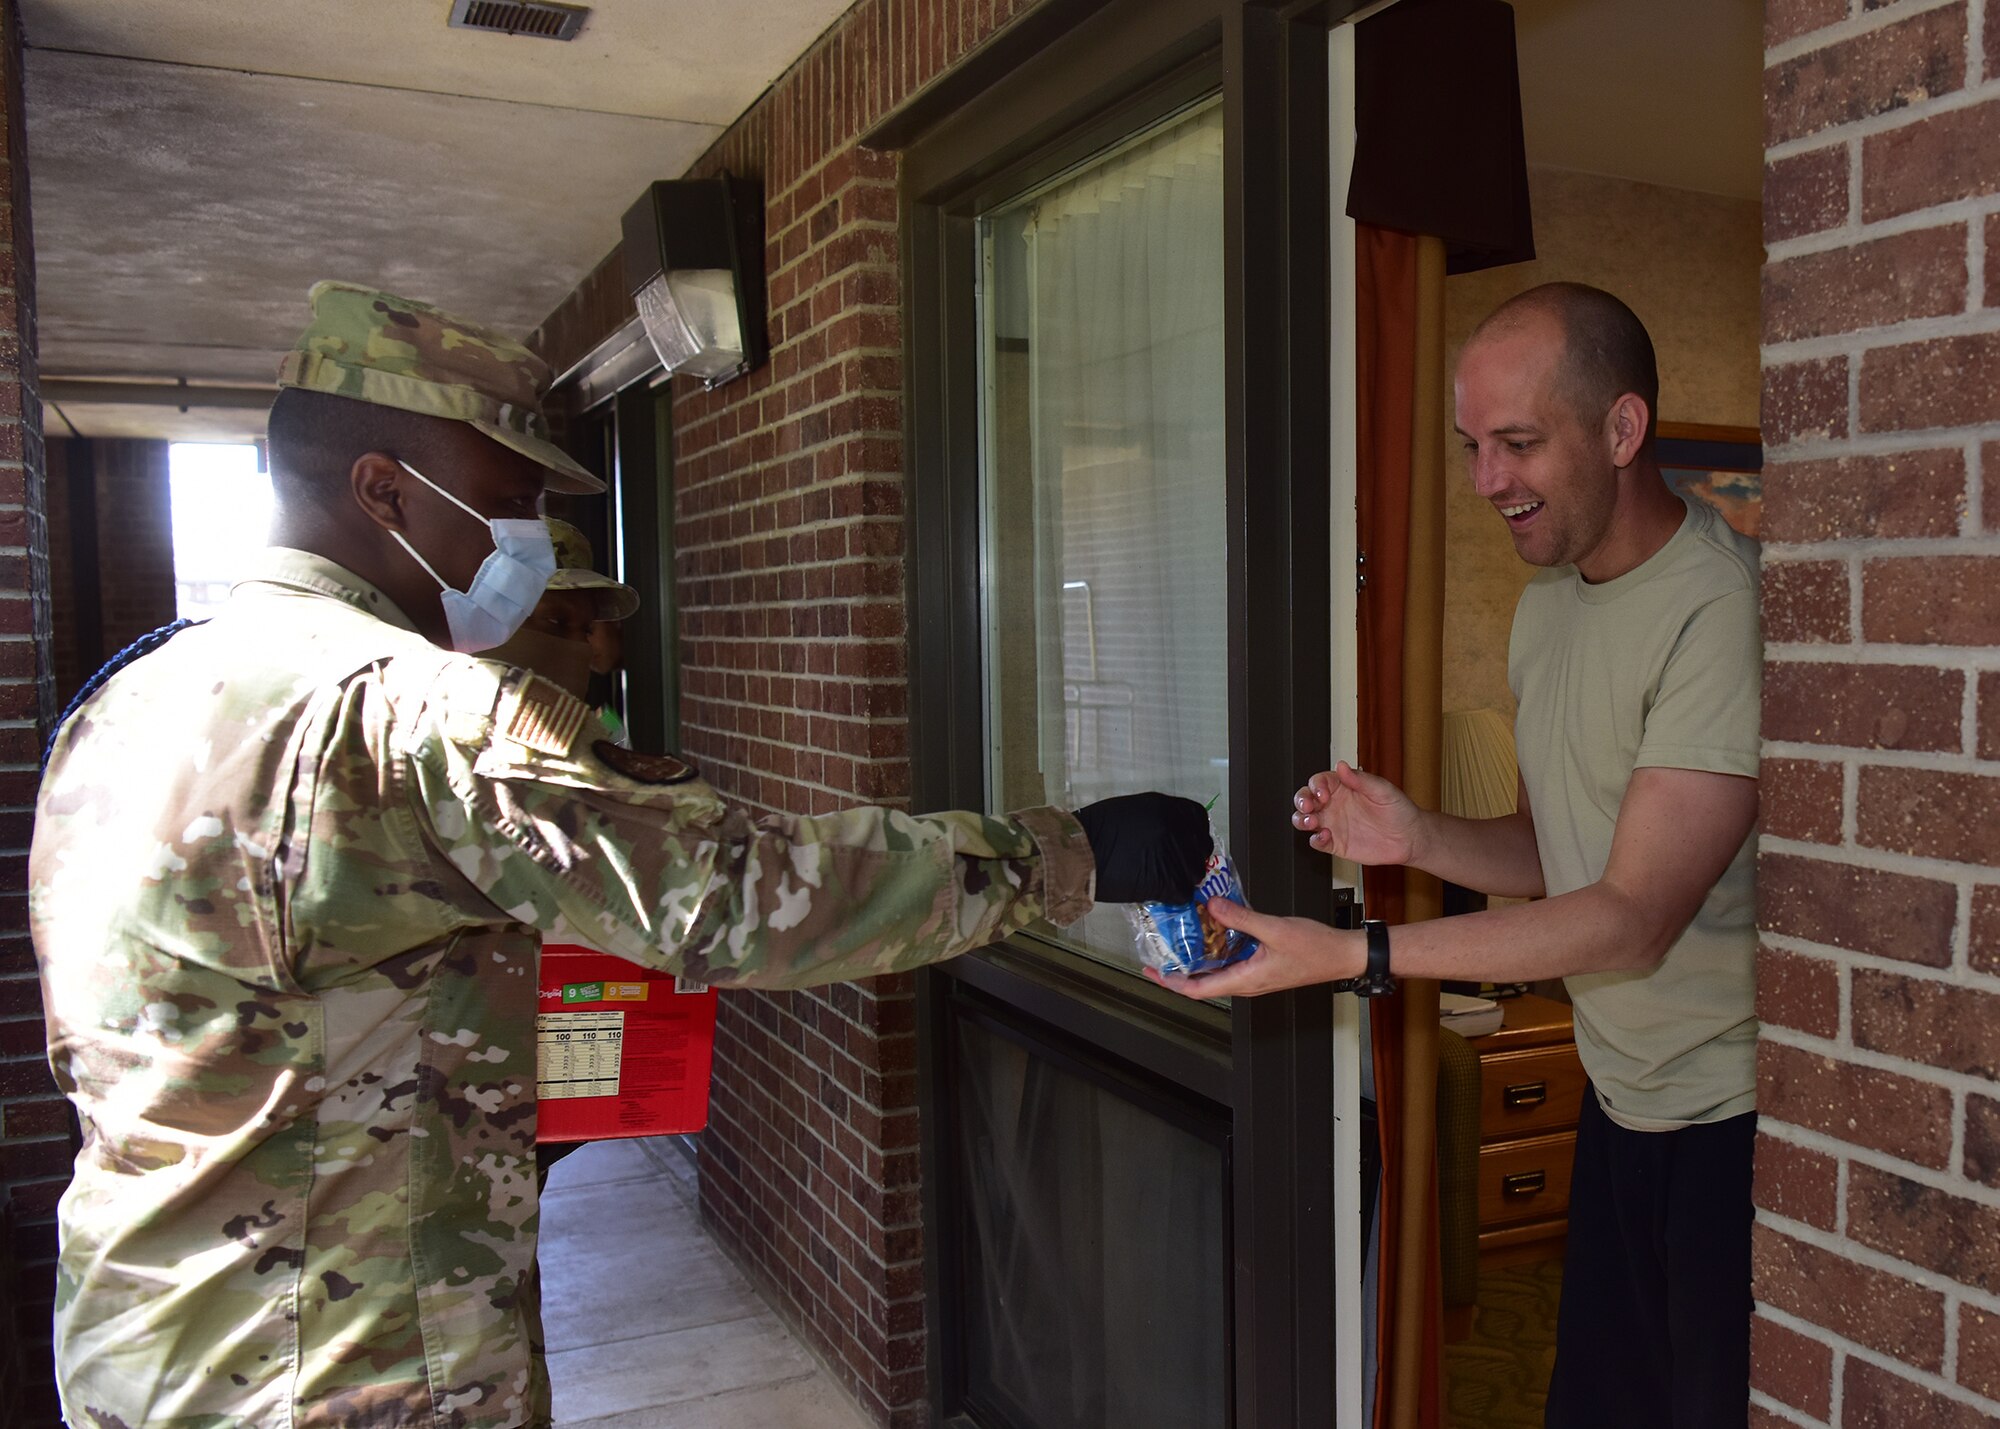 U.S. Air Force Tech. Sgt. Abram Robins, 17th Training Wing military training leader, delivers a care package to an airman in isolation on Goodfellow Air Force Base, Texas, April 20, 2020. The care packages are part of an ongoing joint project between the base and local civic leaders to ensure inbound members are taken care of during their mandatory isolation period as a result of the COVID-19 pandemic. (U.S. Air Force photo by Staff Sgt. Chad Warren)